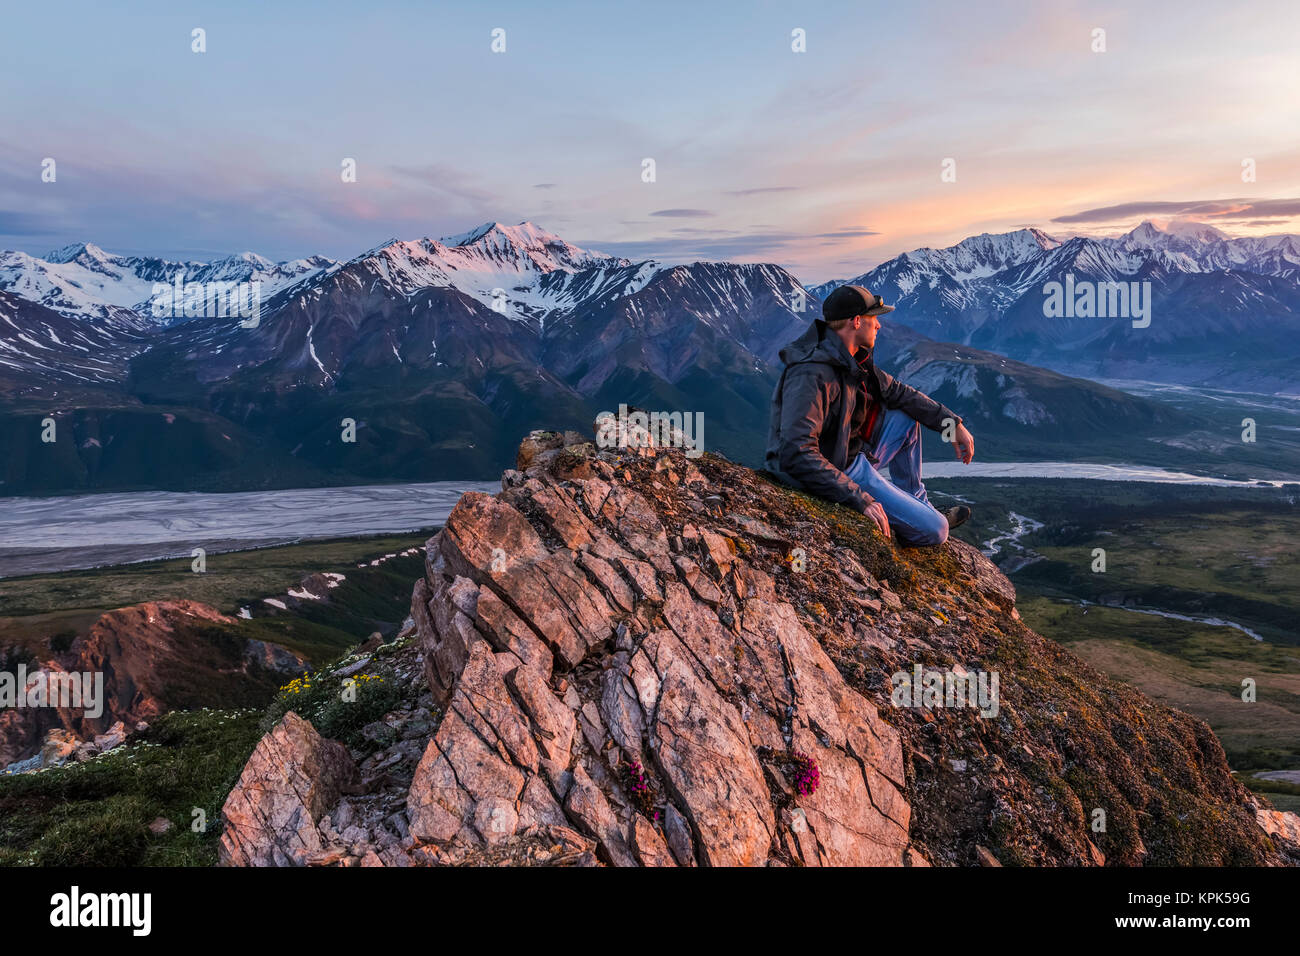 A man observes a tranquil sunset from an alpine perch in the Alaska Range high above the Delta River; Alaska, United States of America Stock Photo